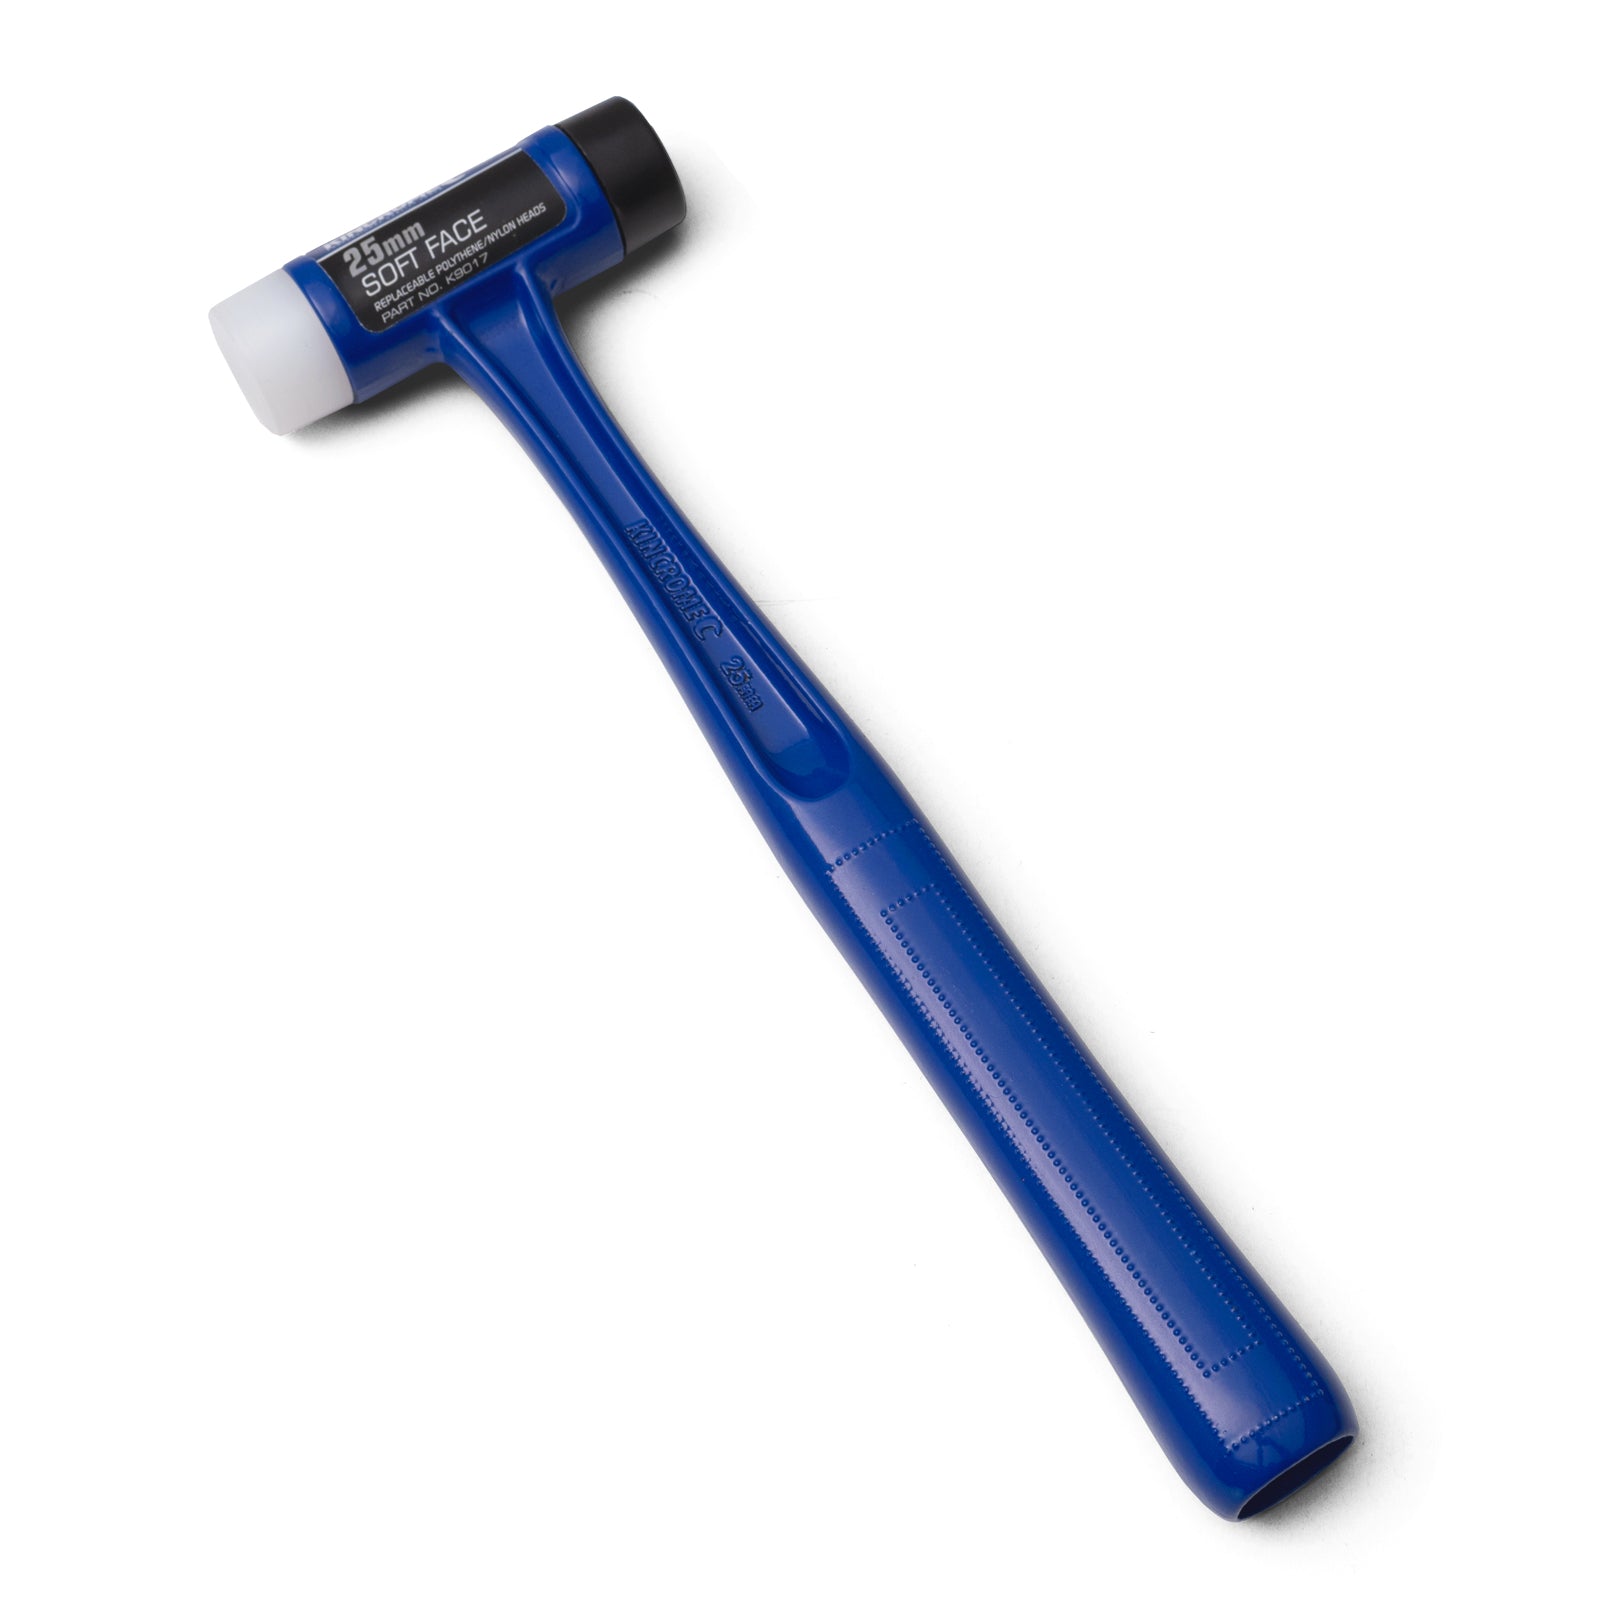 Soft Face Hammer, Polthene/Nylon by Kincrome